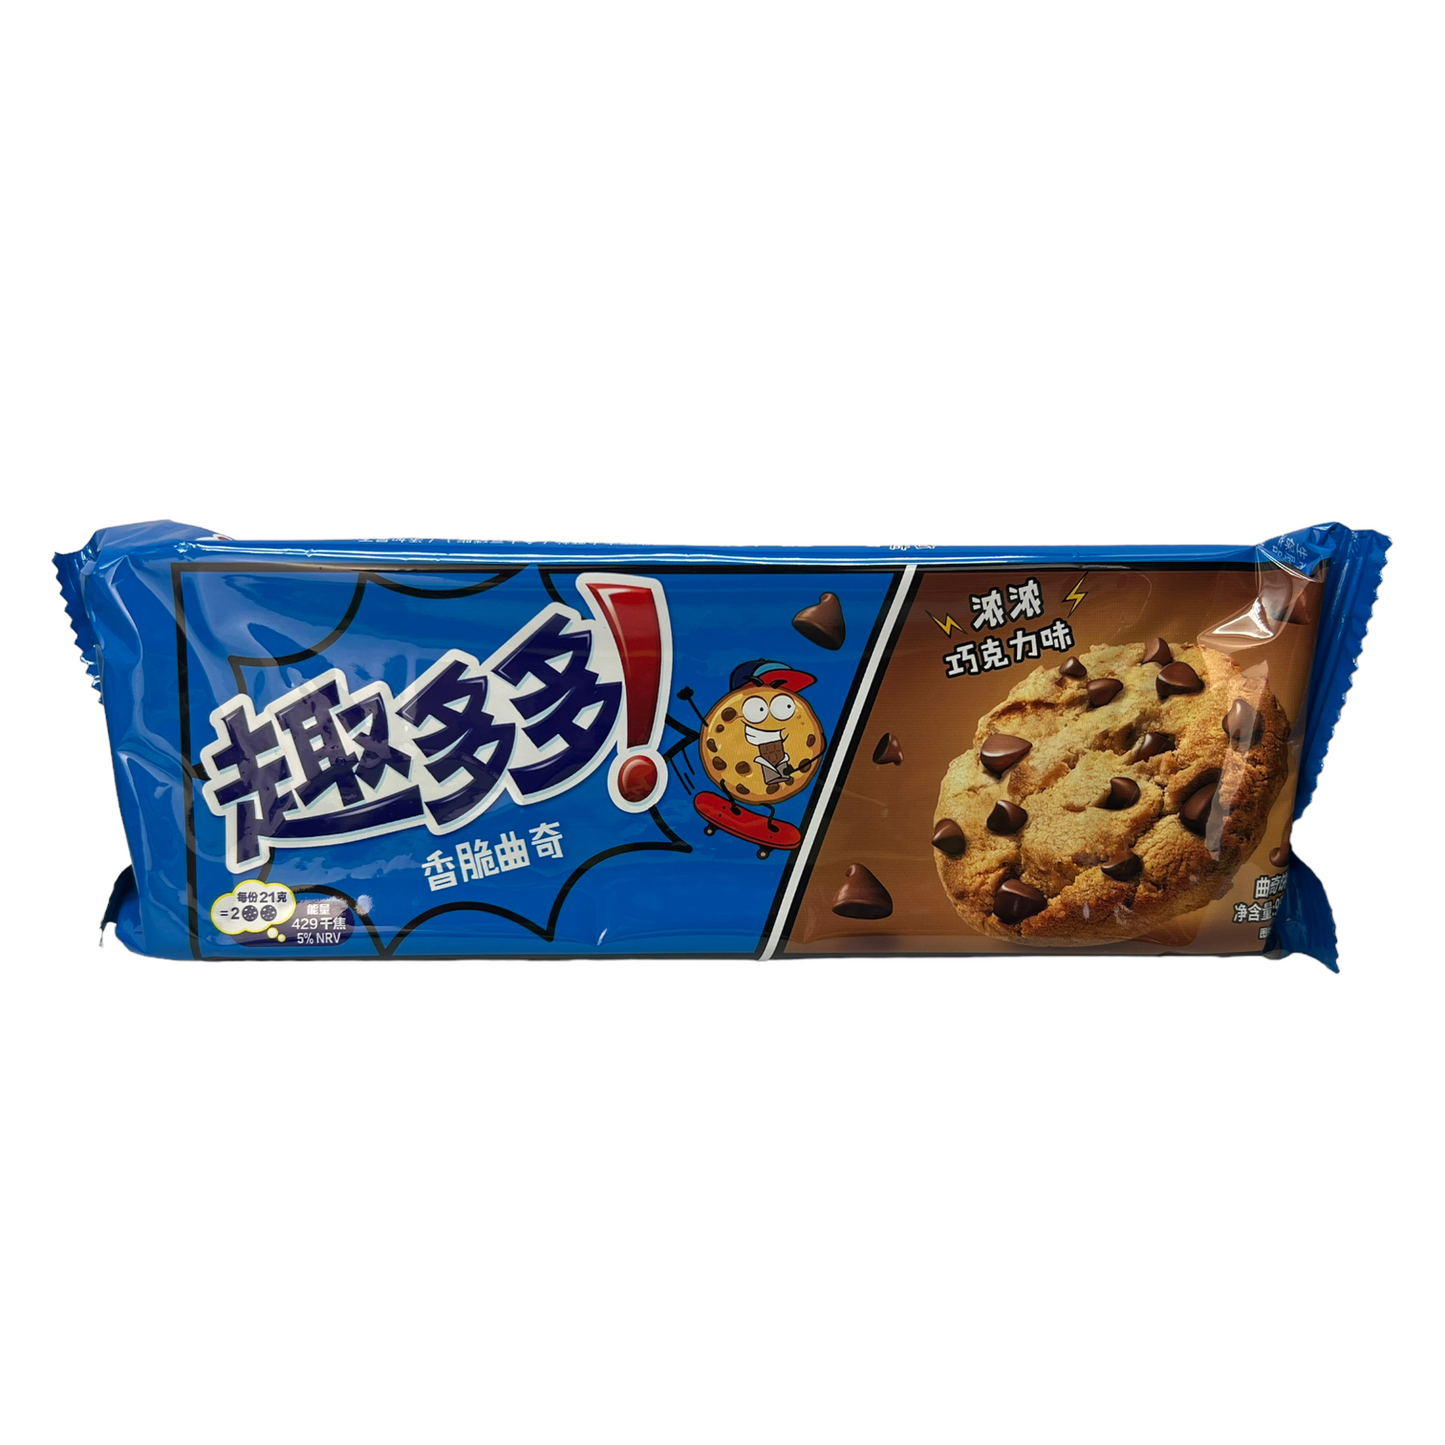 Chips Ahoy - Chocolate Chip